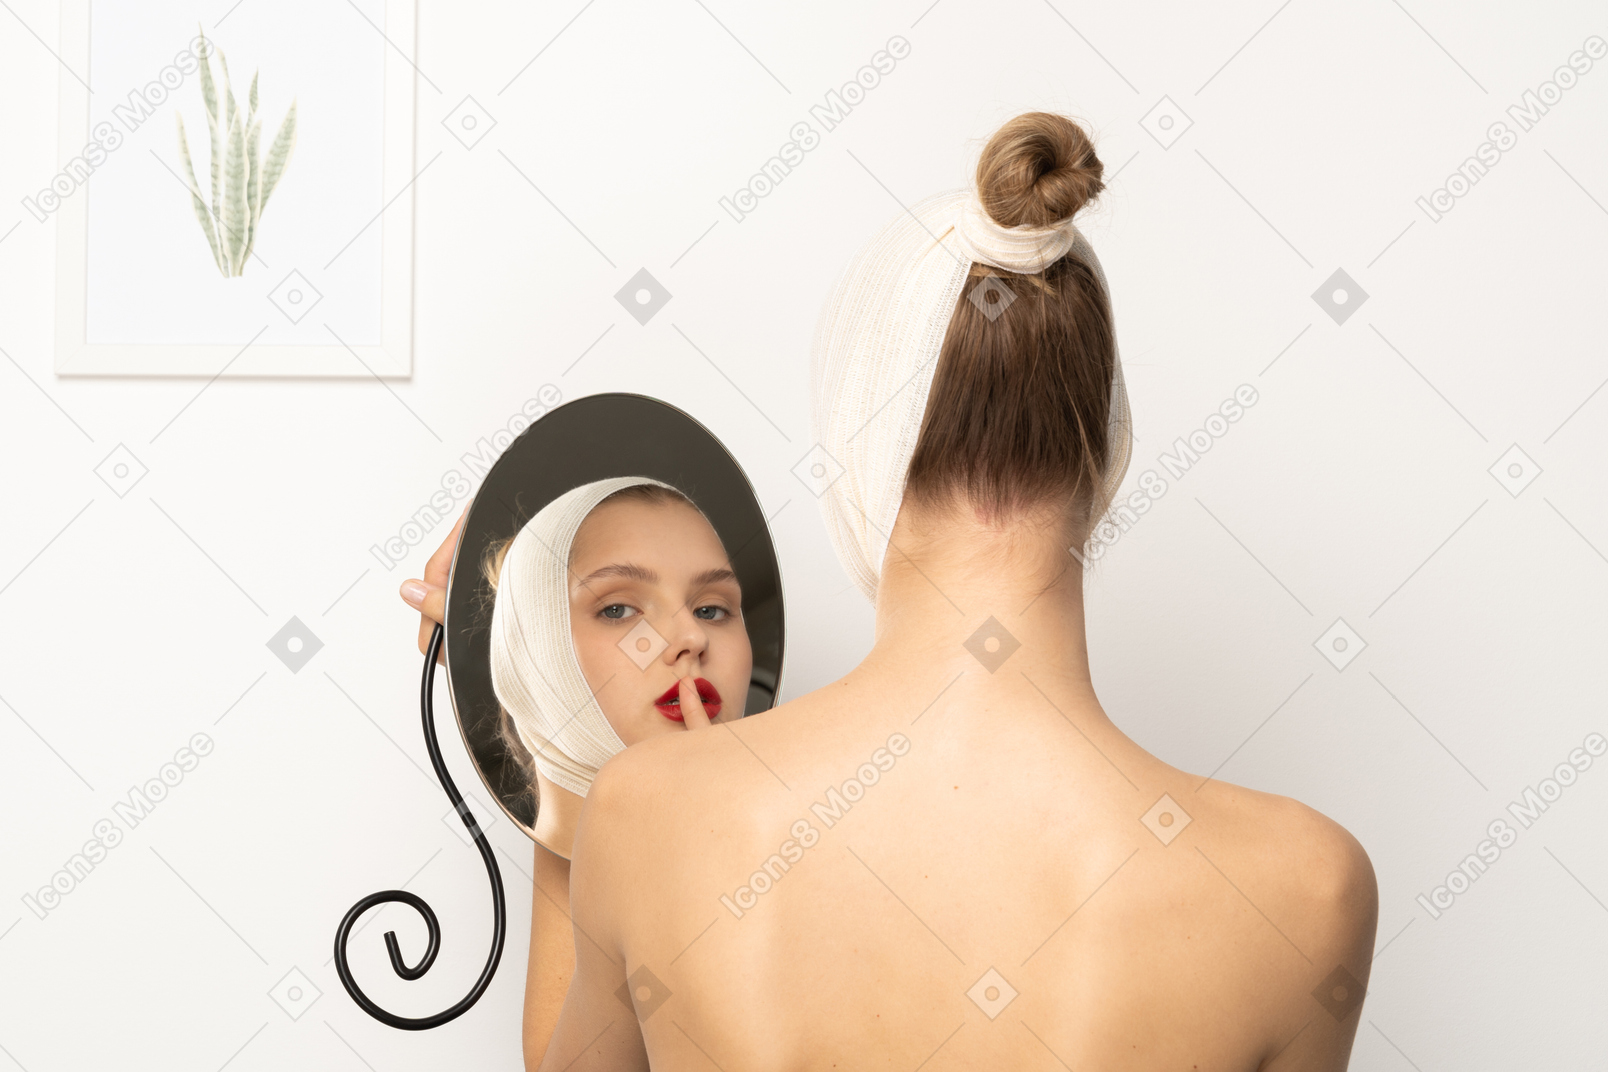 Young woman holding a mirror and making silence gesture